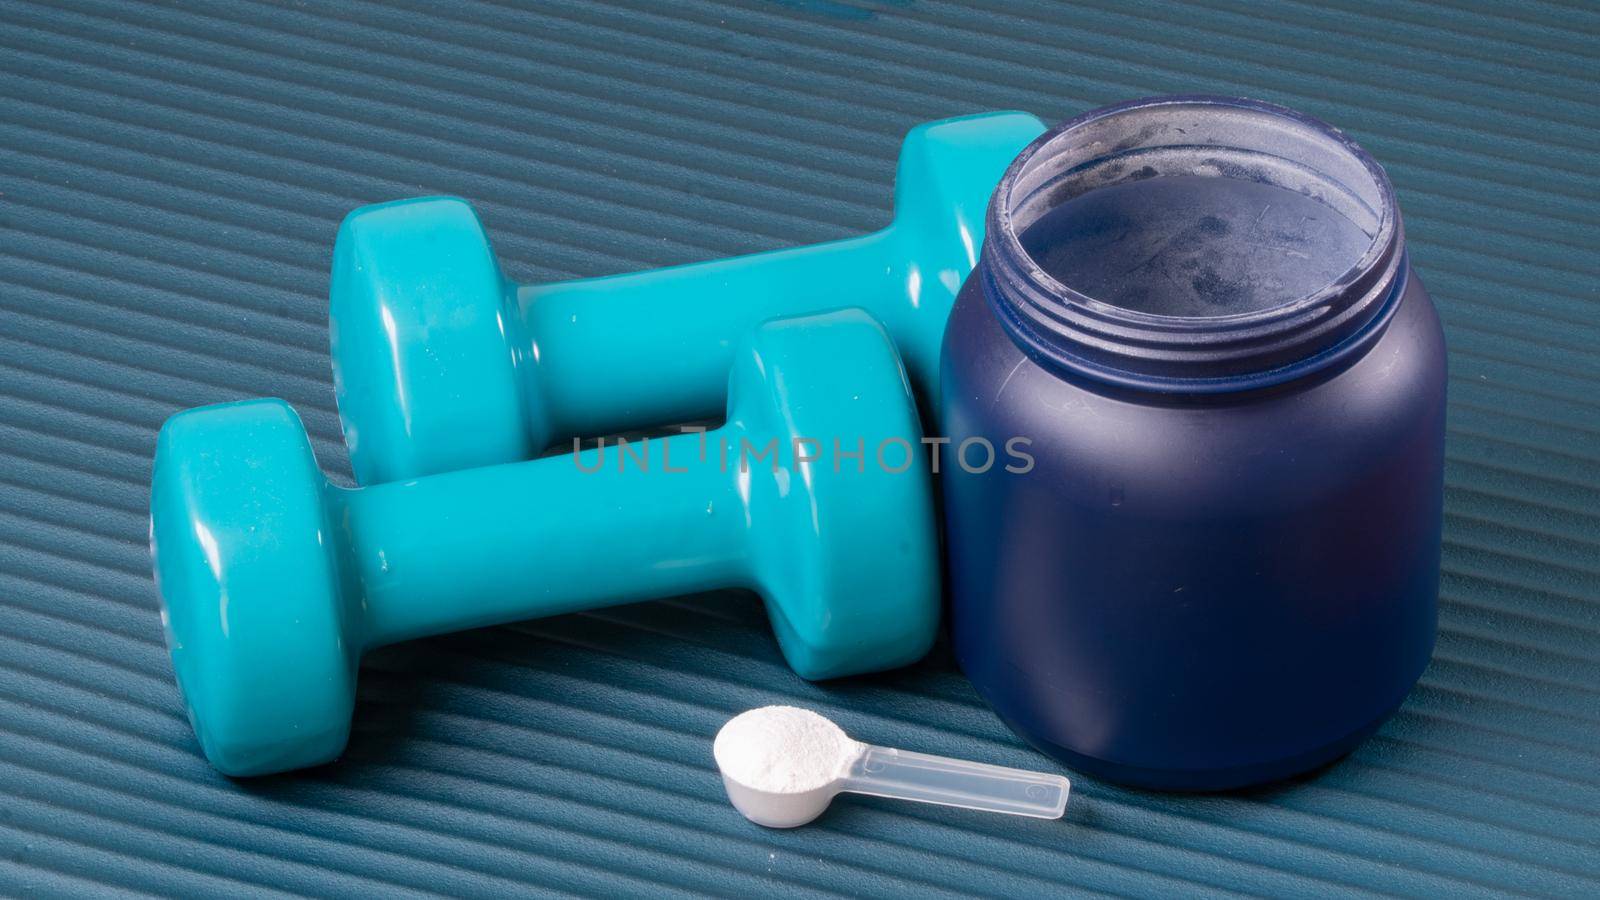 Sports nutrition and dumbbells on the mat for training. High quality photo